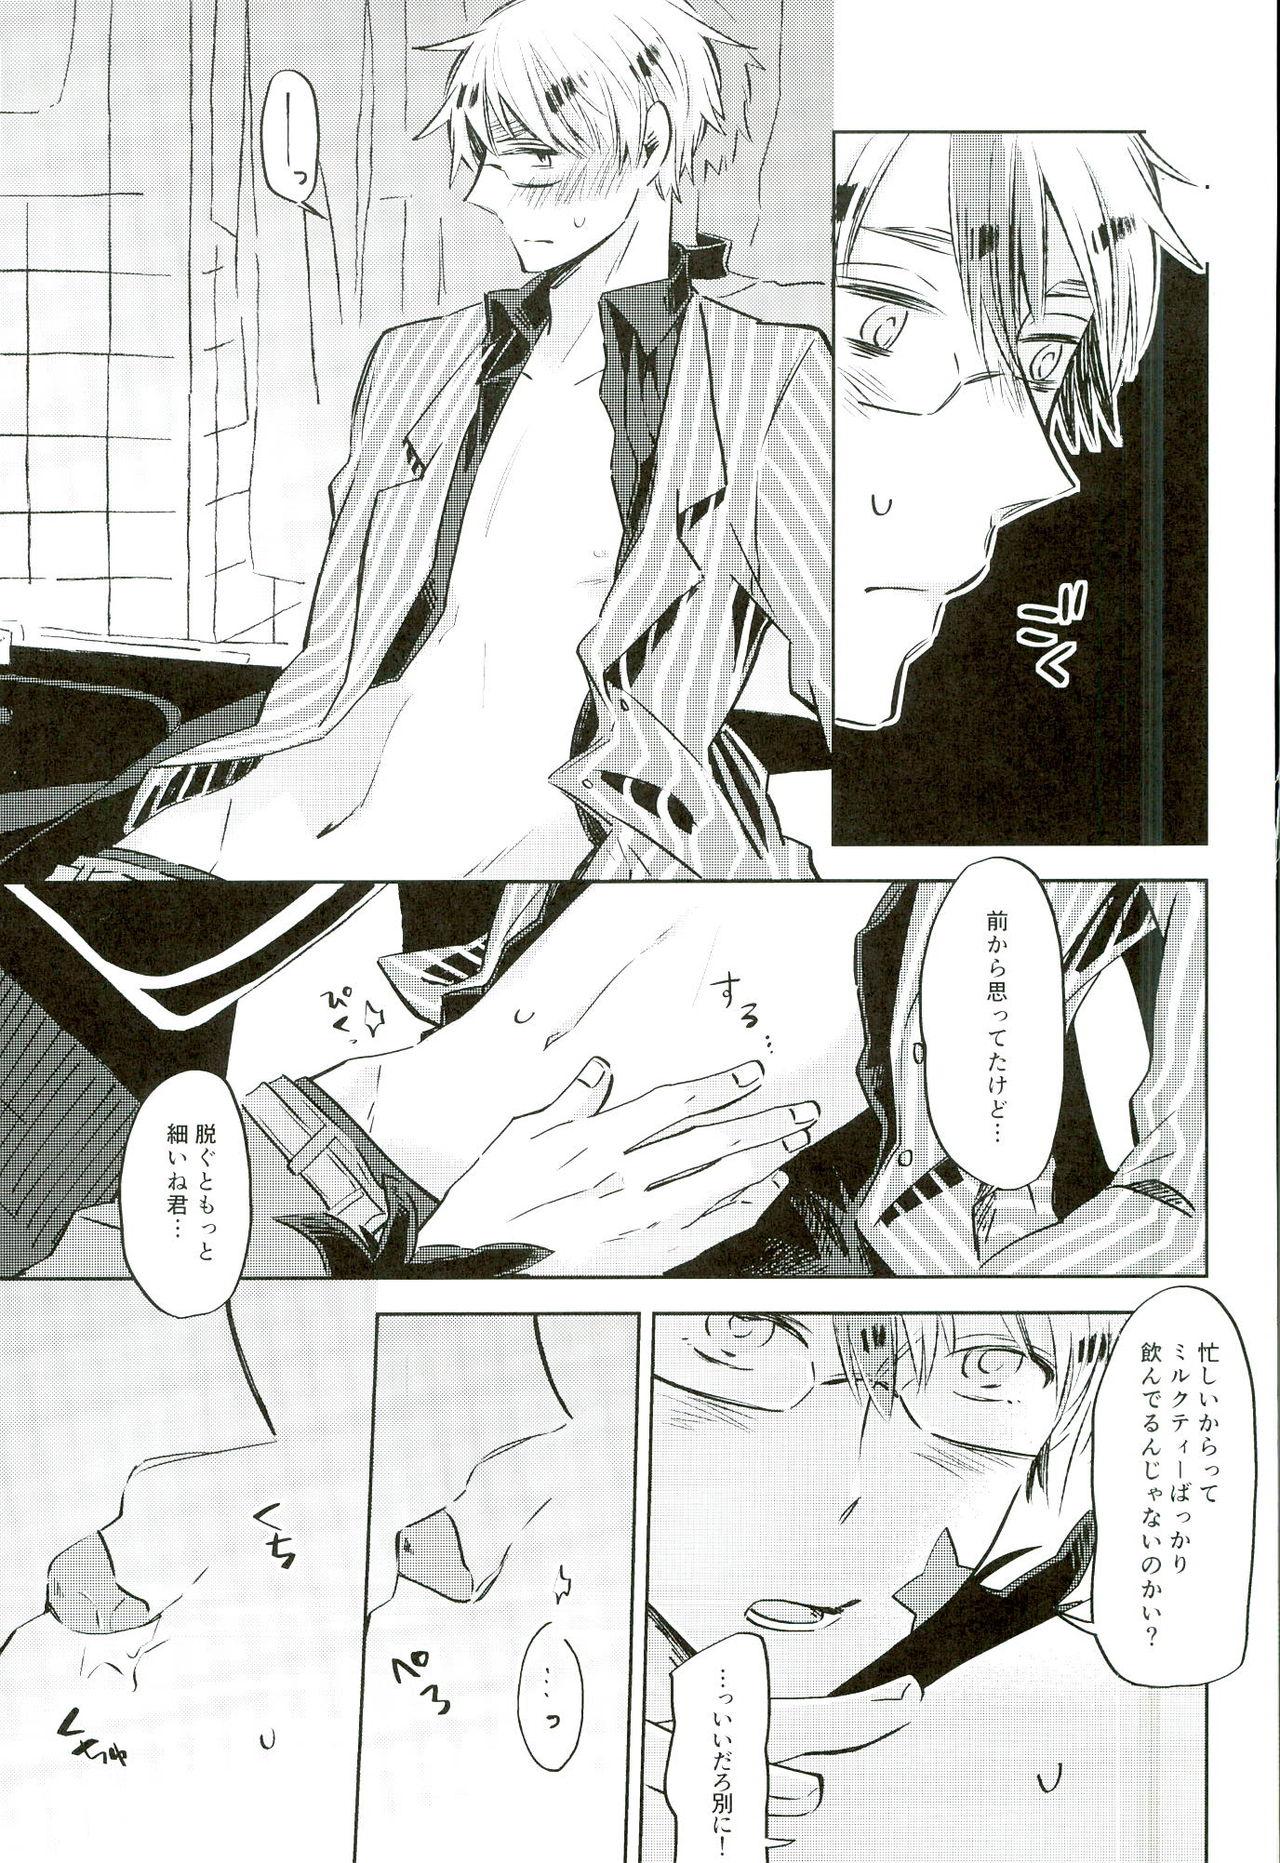 Black Ameagari no Slip Out - Axis powers hetalia Pussylicking - Page 10